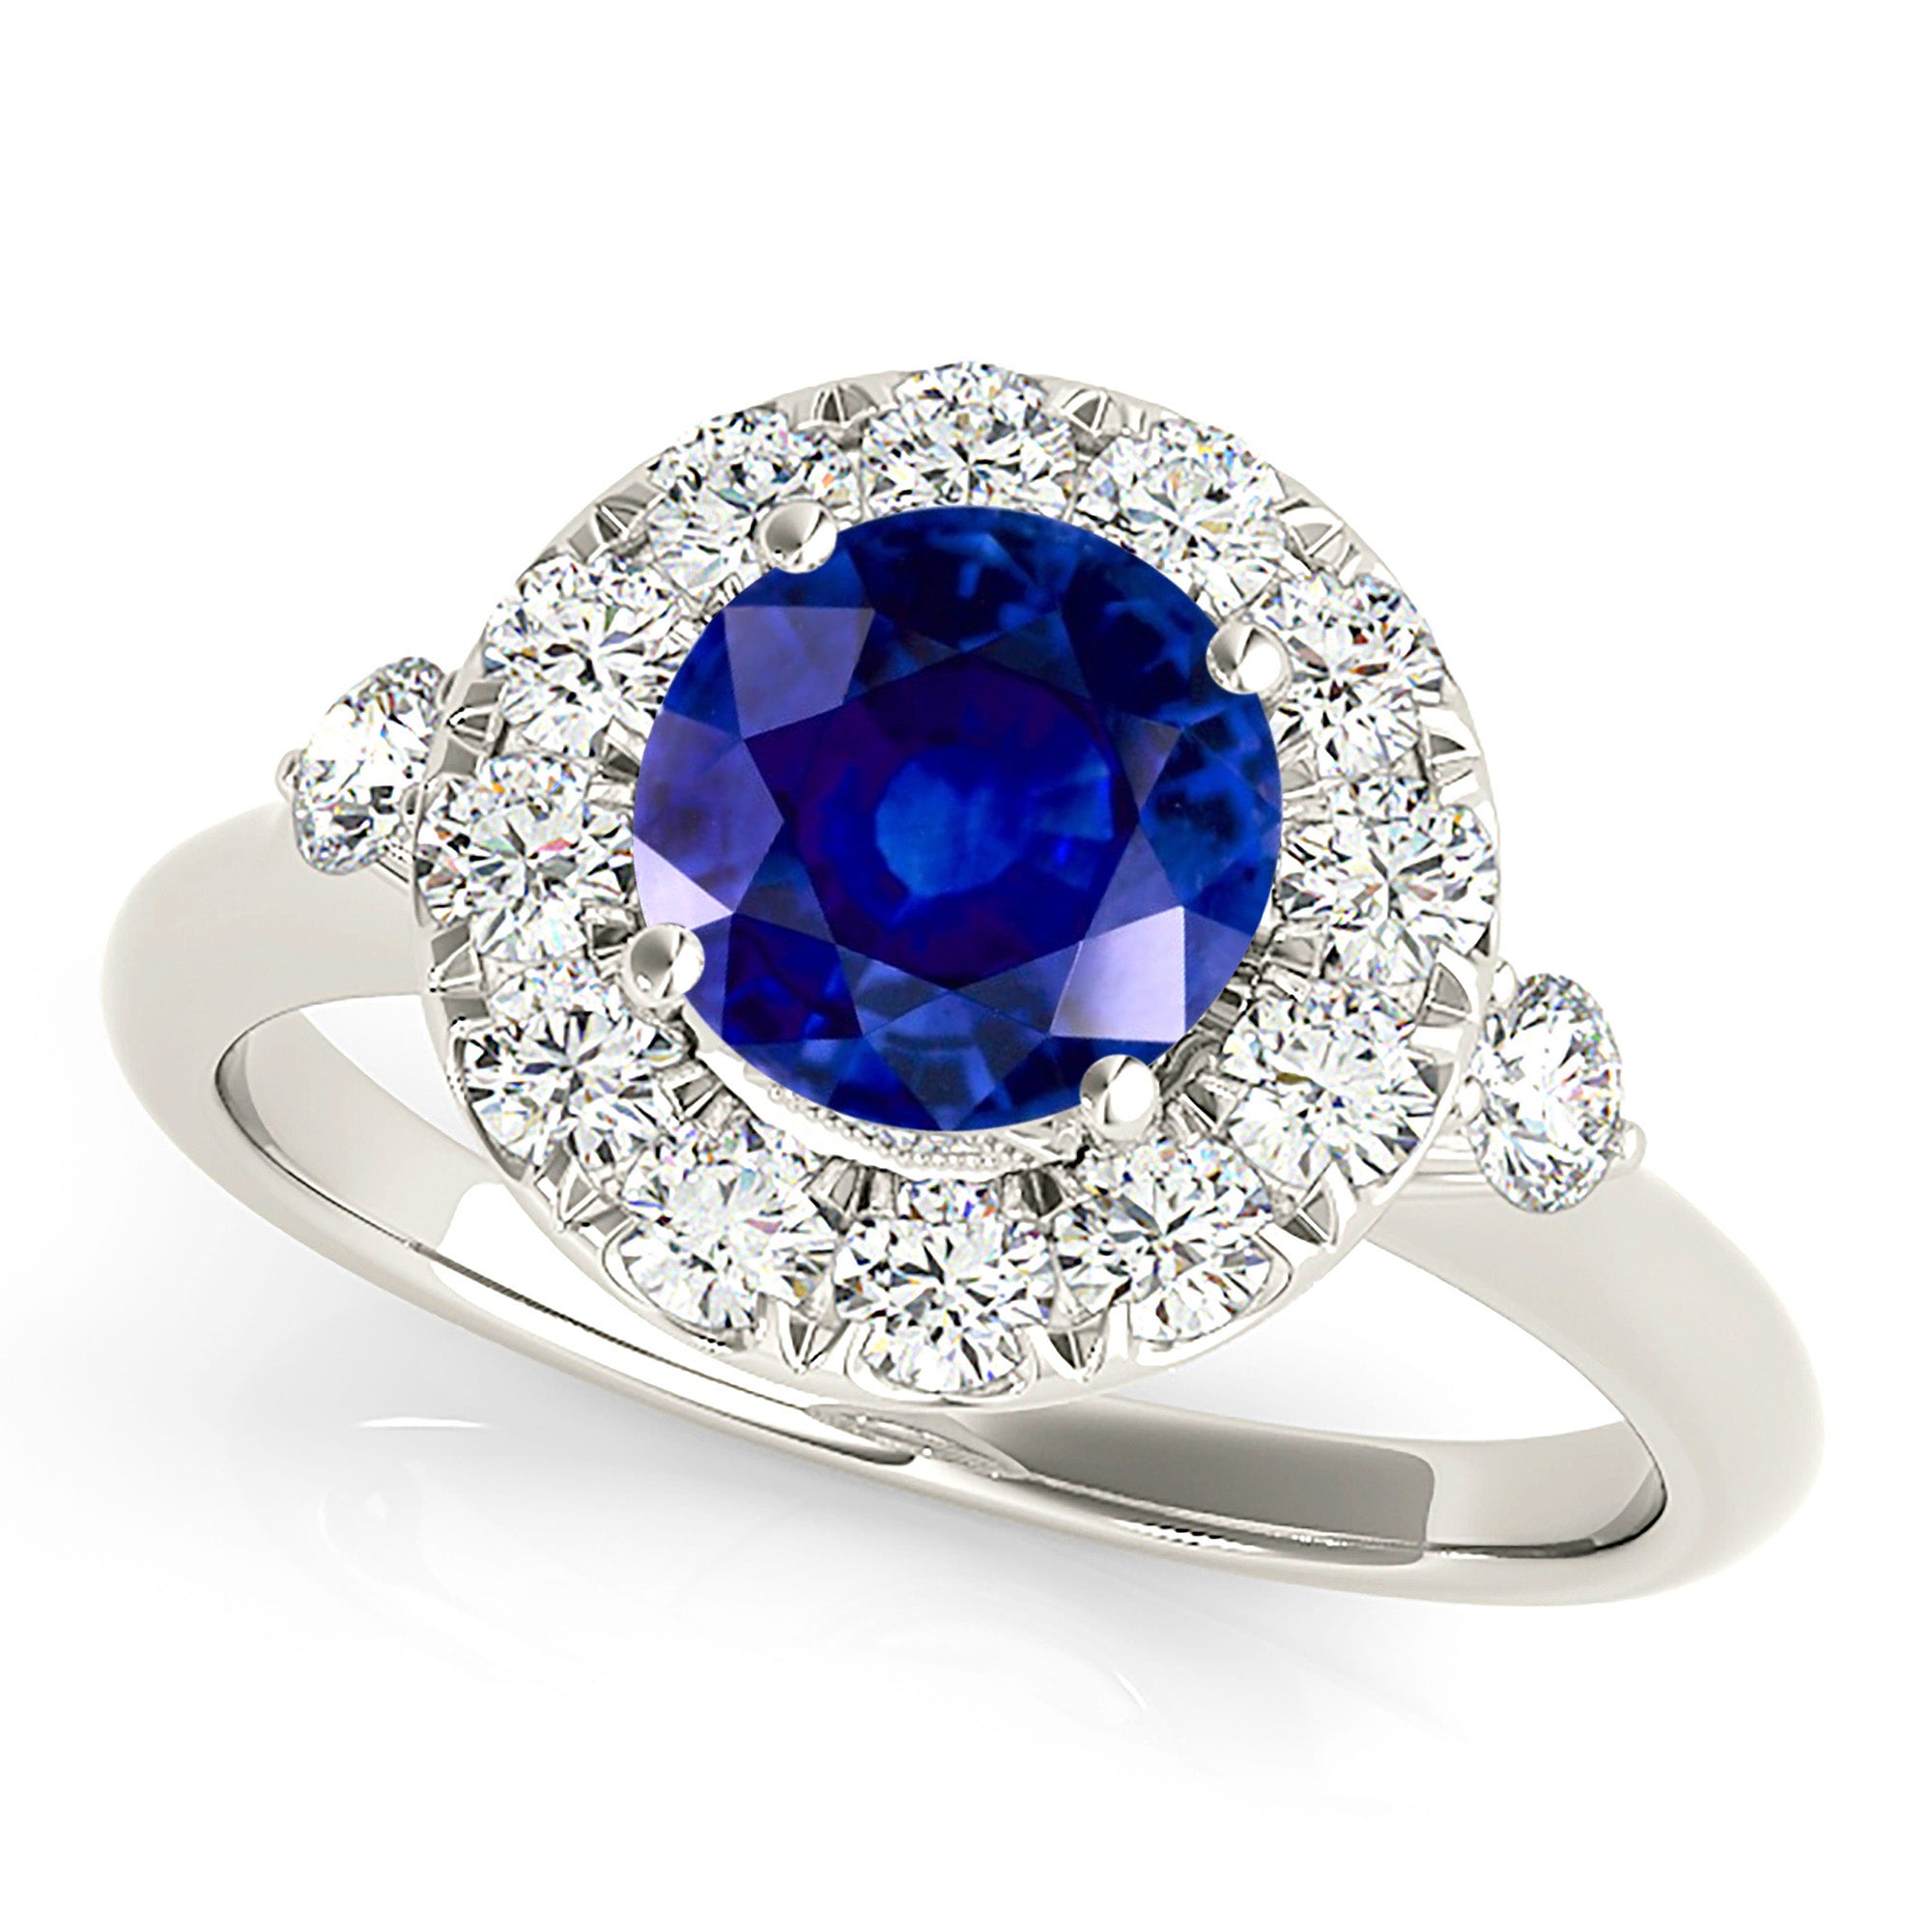 1.35 ct. Genuine Blue Sapphire Ring With 0.40 ctw. Diamond Halo, Two Side Accent Diamonds, Solid Gold Band | Sapphire And Diamond Ring-in 14K/18K White, Yellow, Rose Gold and Platinum - Christmas Jewelry Gift -VIRABYANI